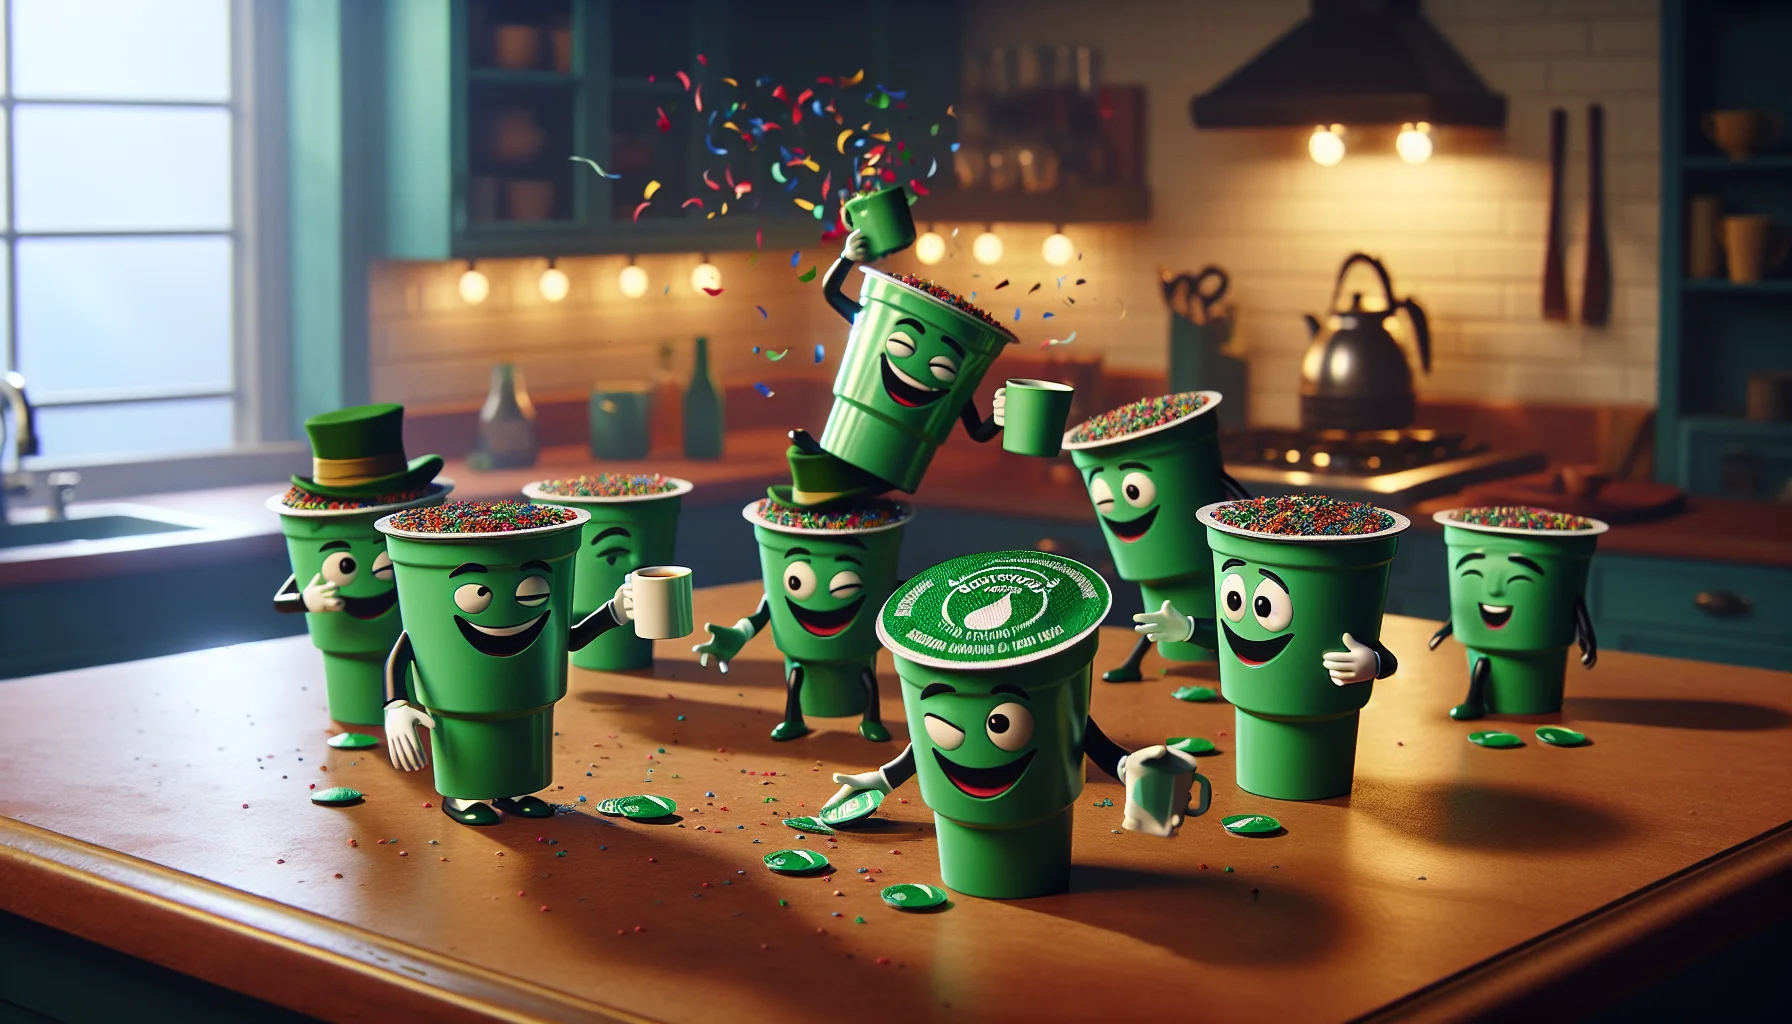 Imagine a humorous scene with green tea k-cups. They're having a party with confetti popping out from the top of the k-cups, and one of them is even wearing a joker's hat, playfully winking us to join the fun. K-cups are dancing around in a circle, some of them have tiny hands and are making toasts. Through the visual puns and playful interaction, they're encouraging us to enjoy the simple pleasure of a hot cup of green tea. The background is a cosy kitchen with warm light.